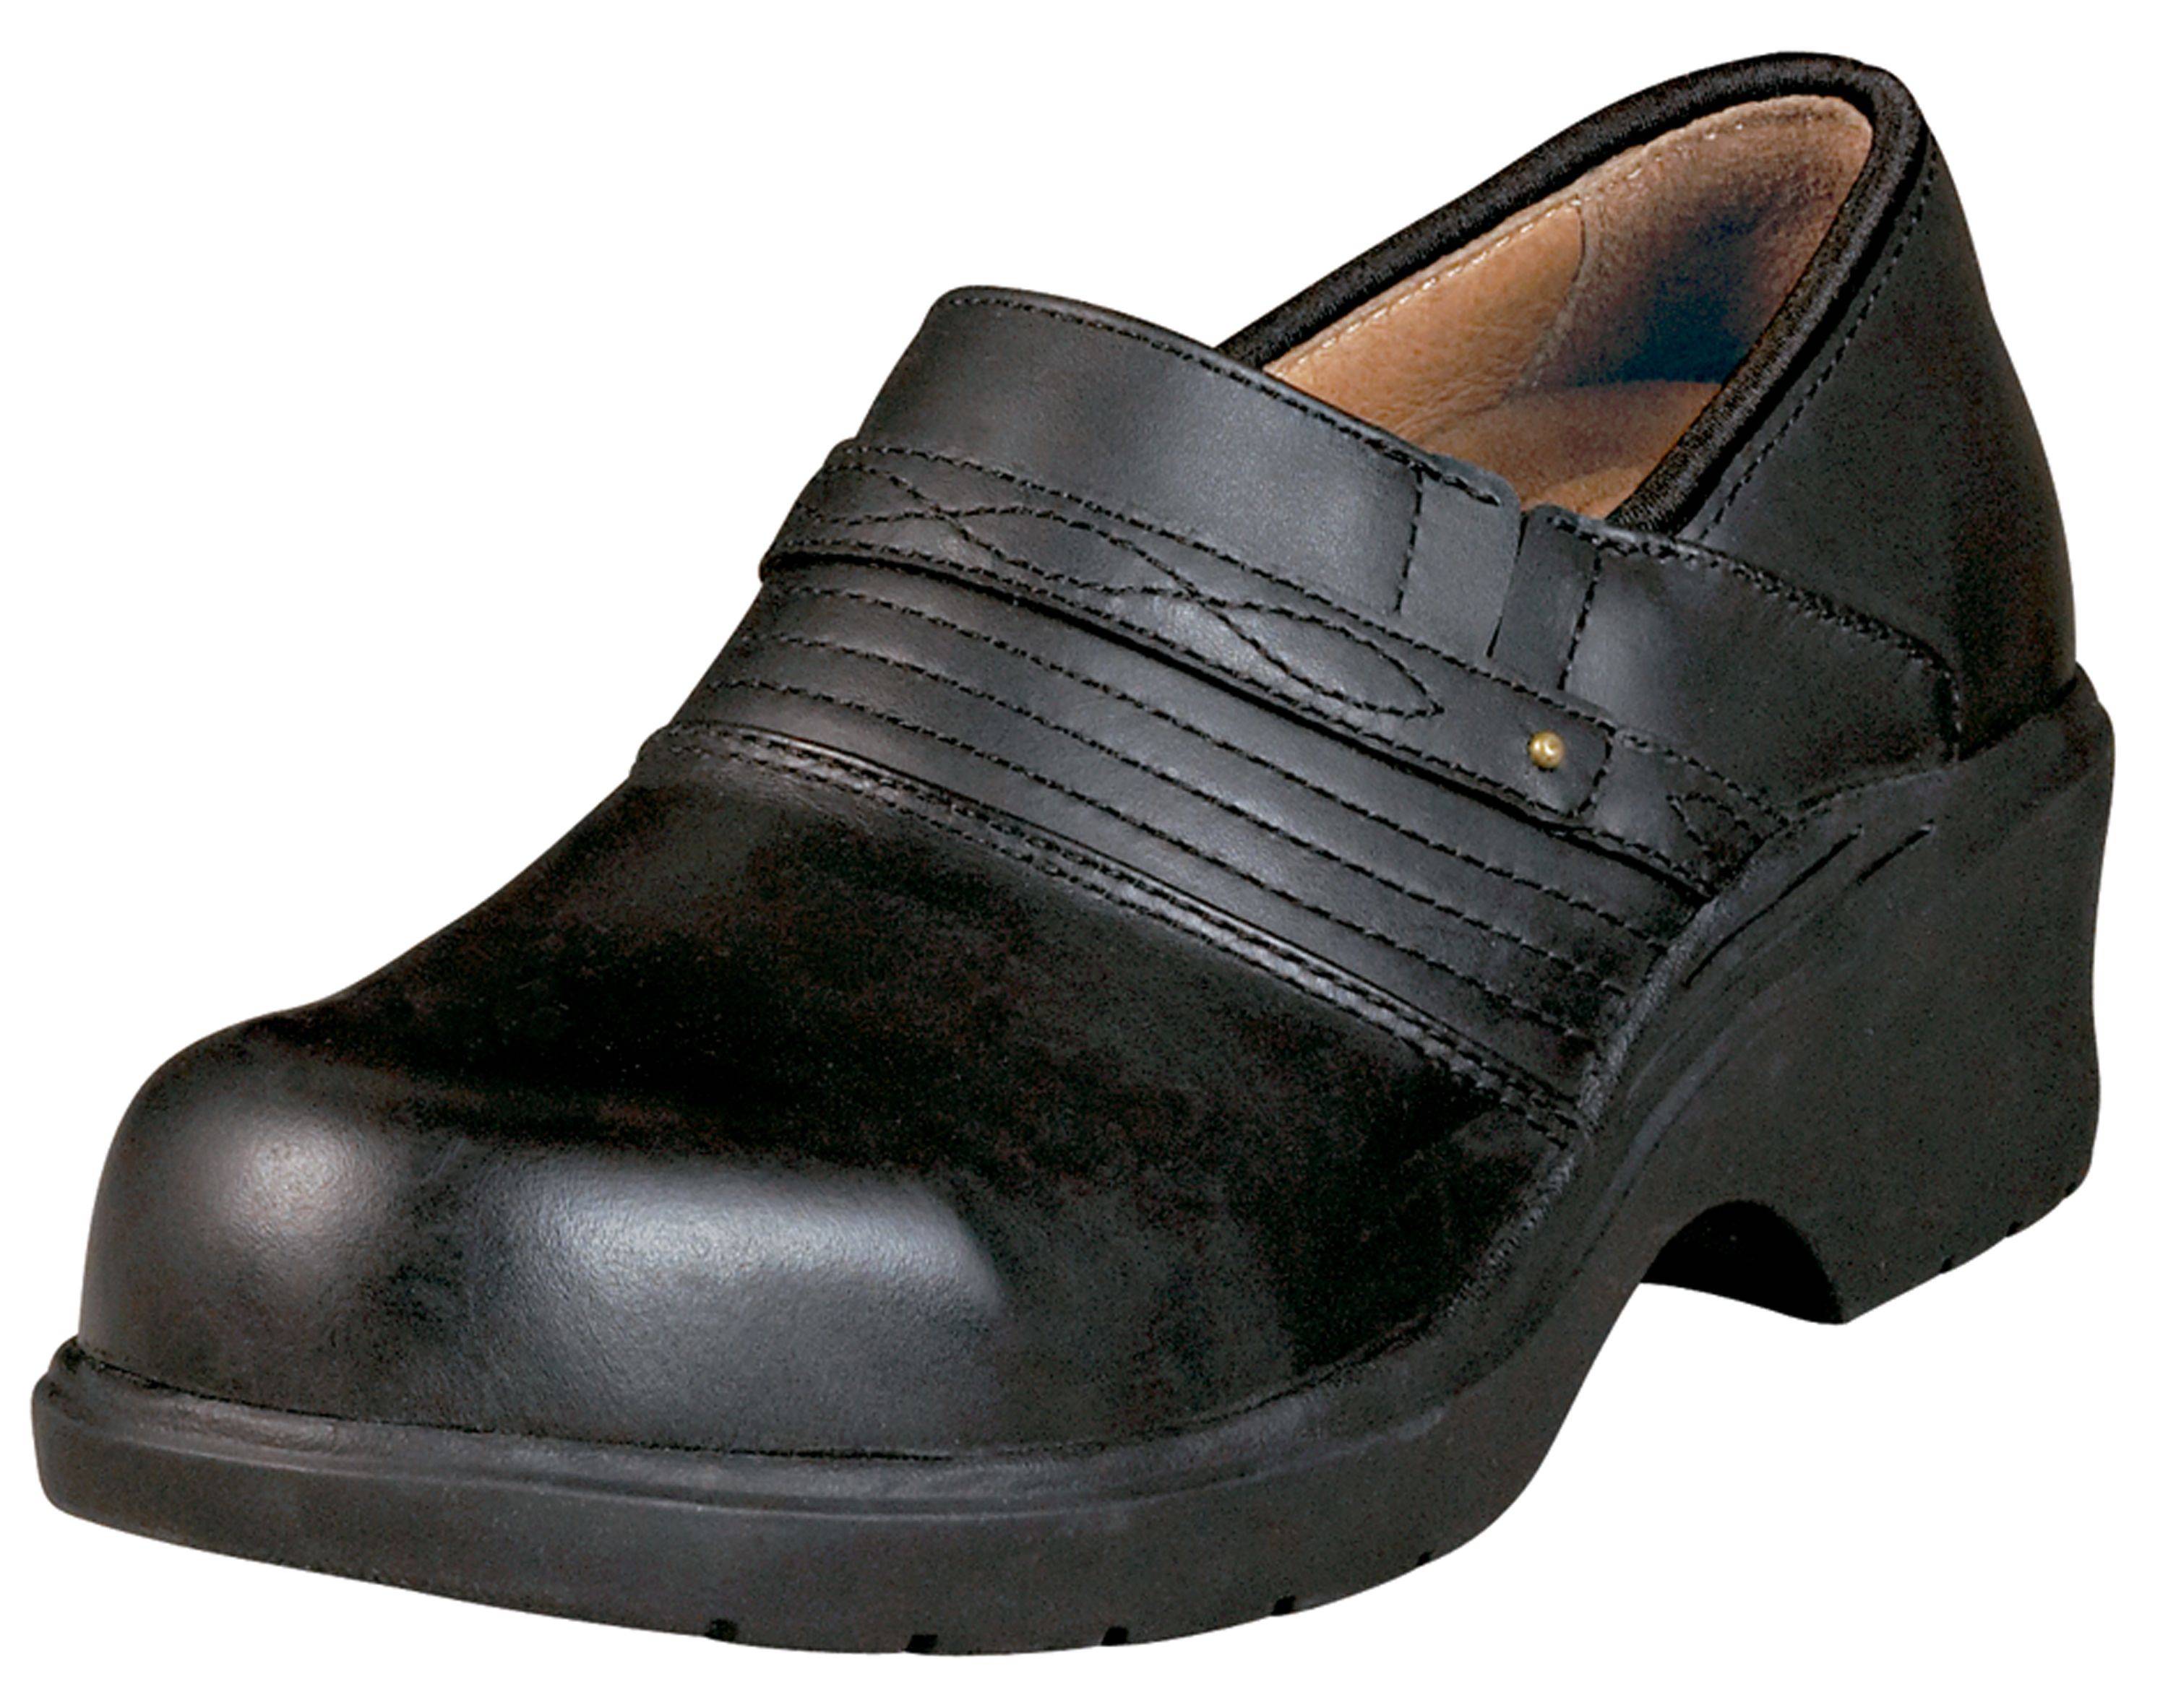 ladies safety clogs